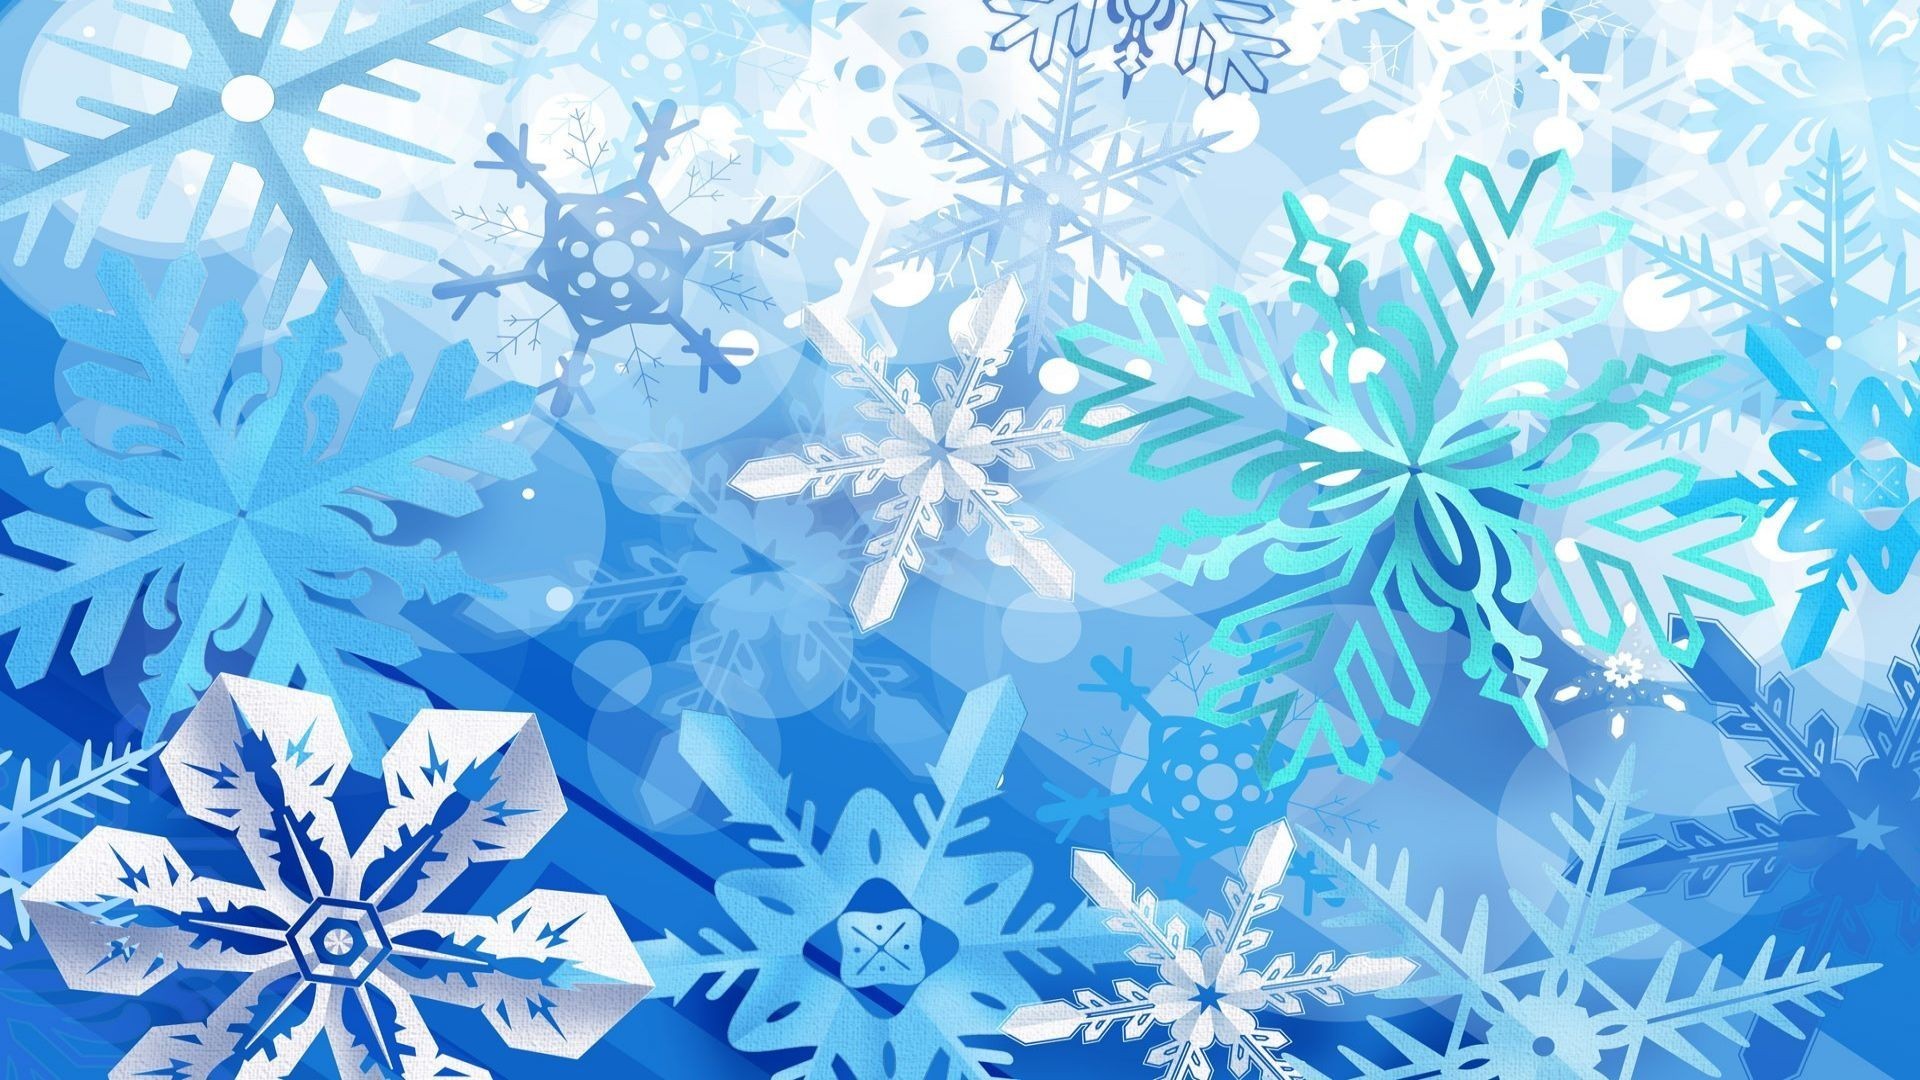 1920x1080 Christmas Snow Backgrounds Wallpapers for gt animated